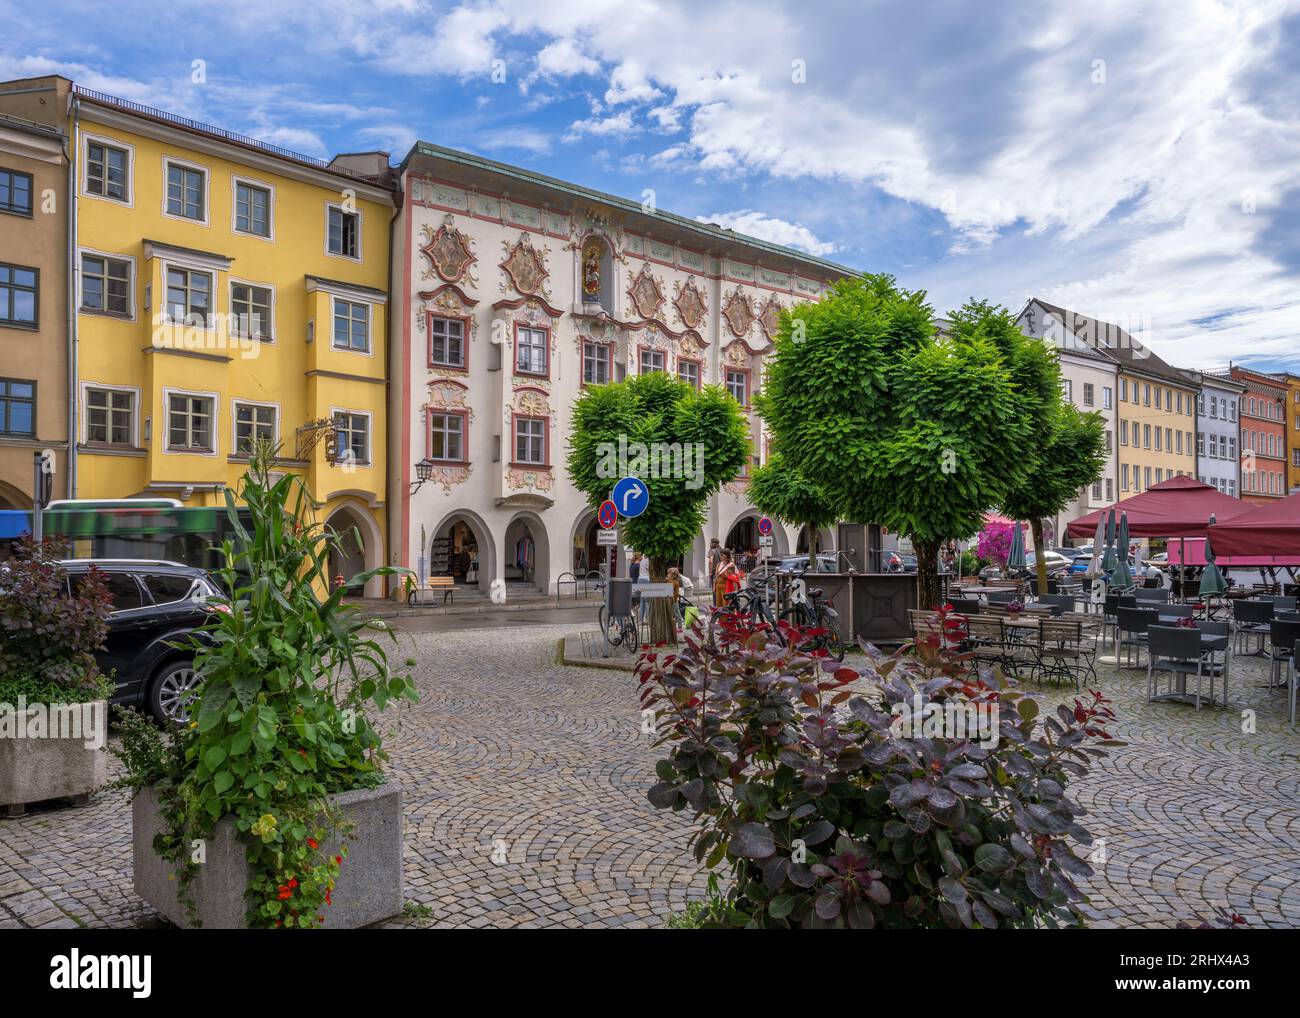 WASSERBURG AM INN, GERMANY - JULY 28: Historic old town of Wasserburg am Inn, Germany on July 28, 2023. View to the Kernhaus, a baroque building from Stock Photo